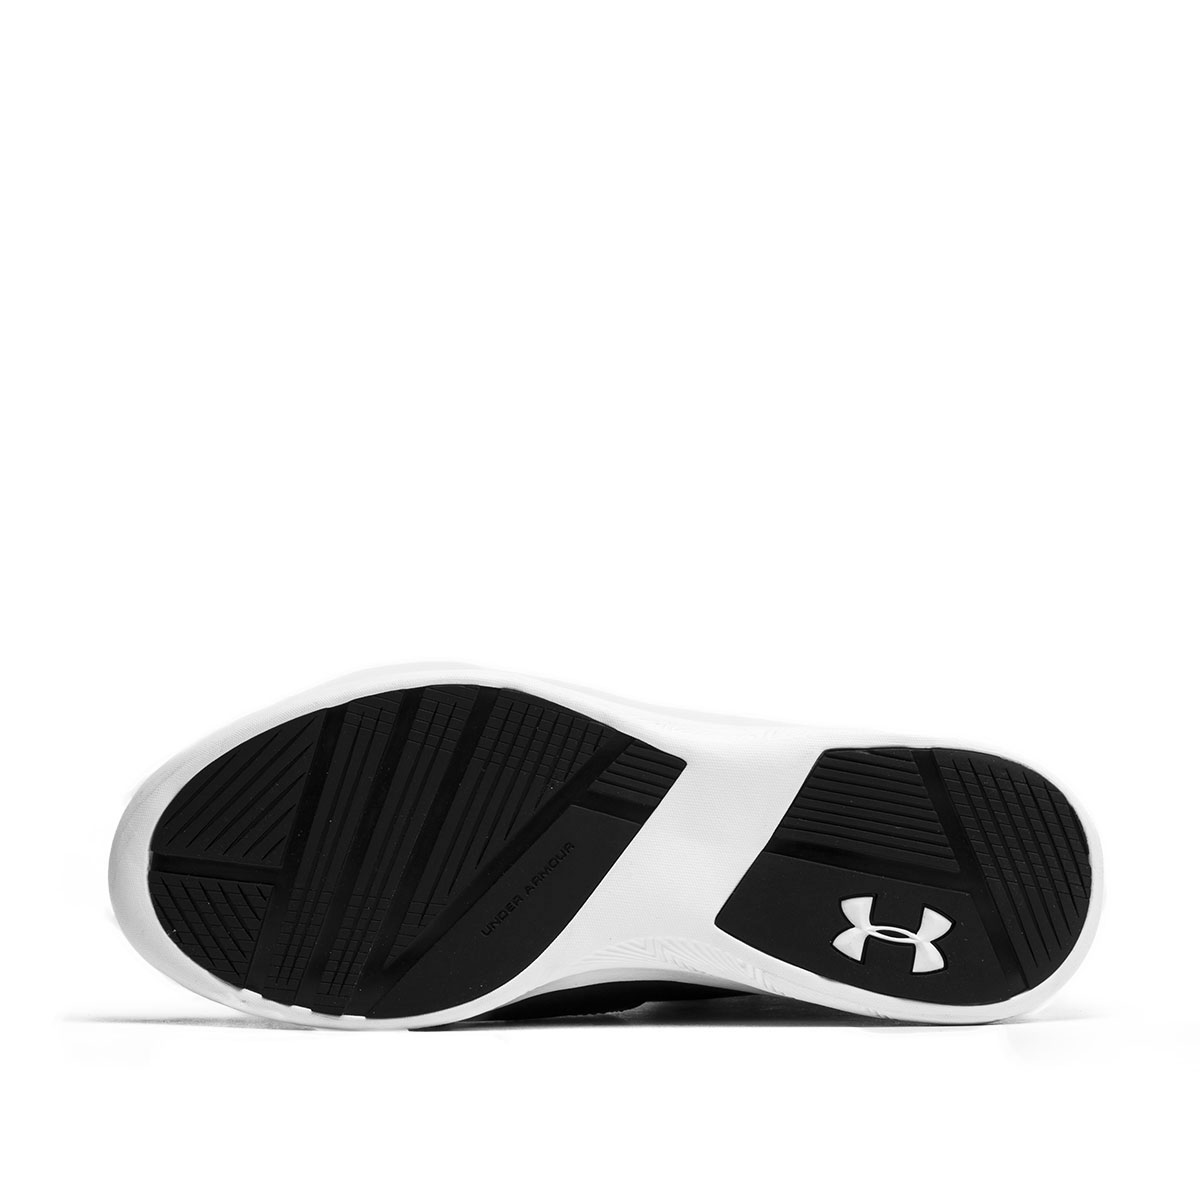 Under Armour Charged Pivot Mid Velcro  3020245-002